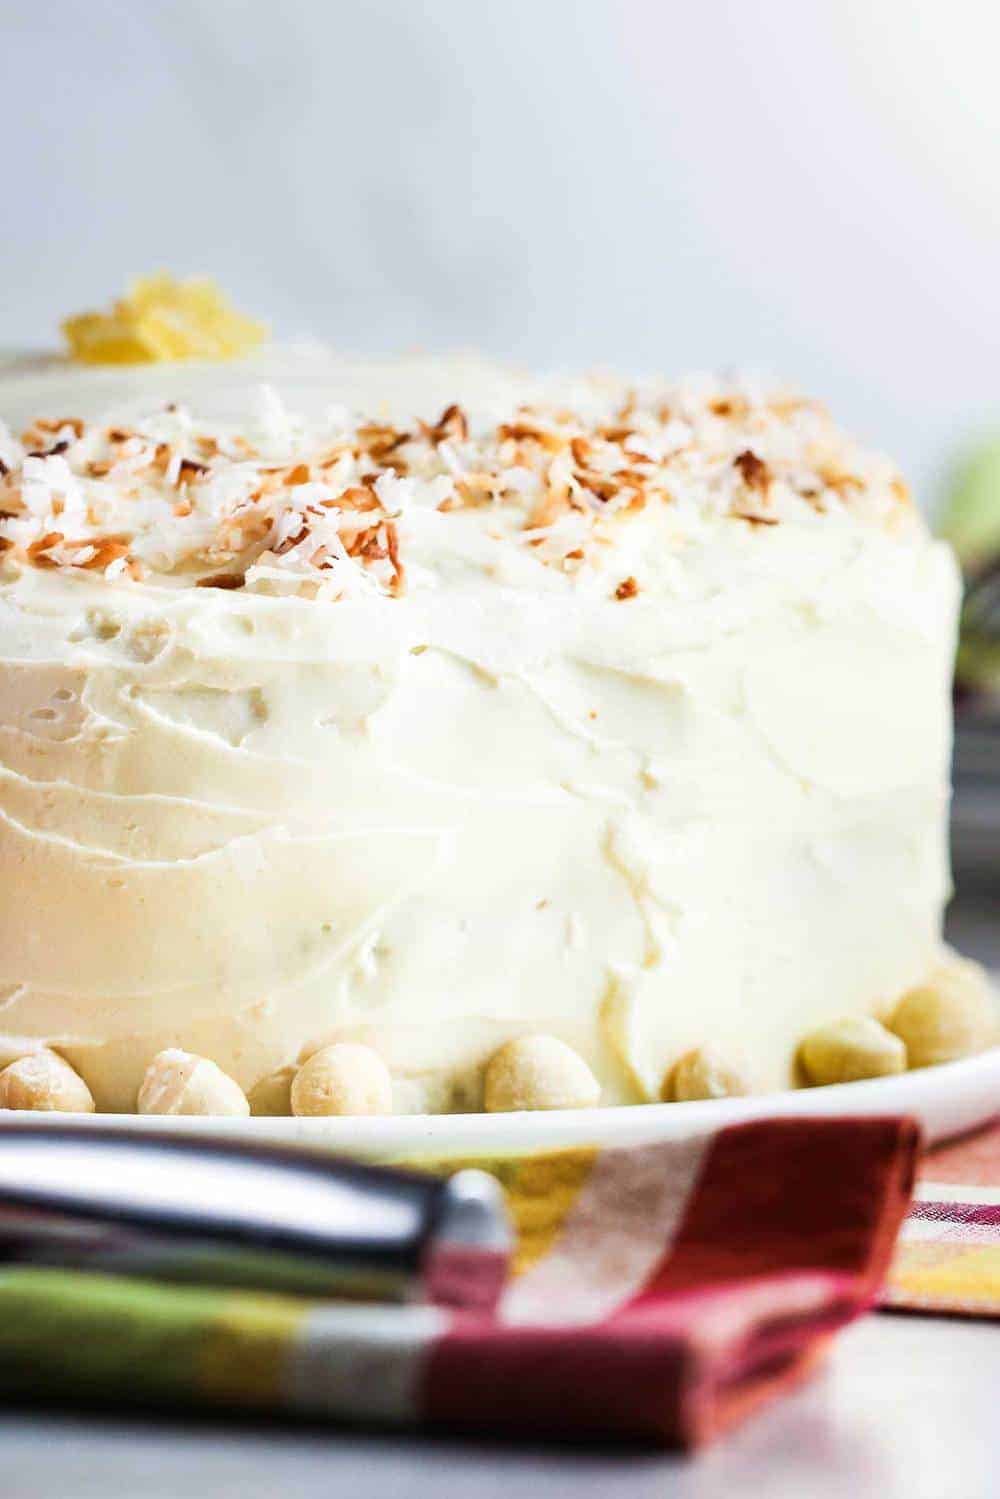 Carrot Cake with Coconut, Ginger and Macadamia Nuts recipe